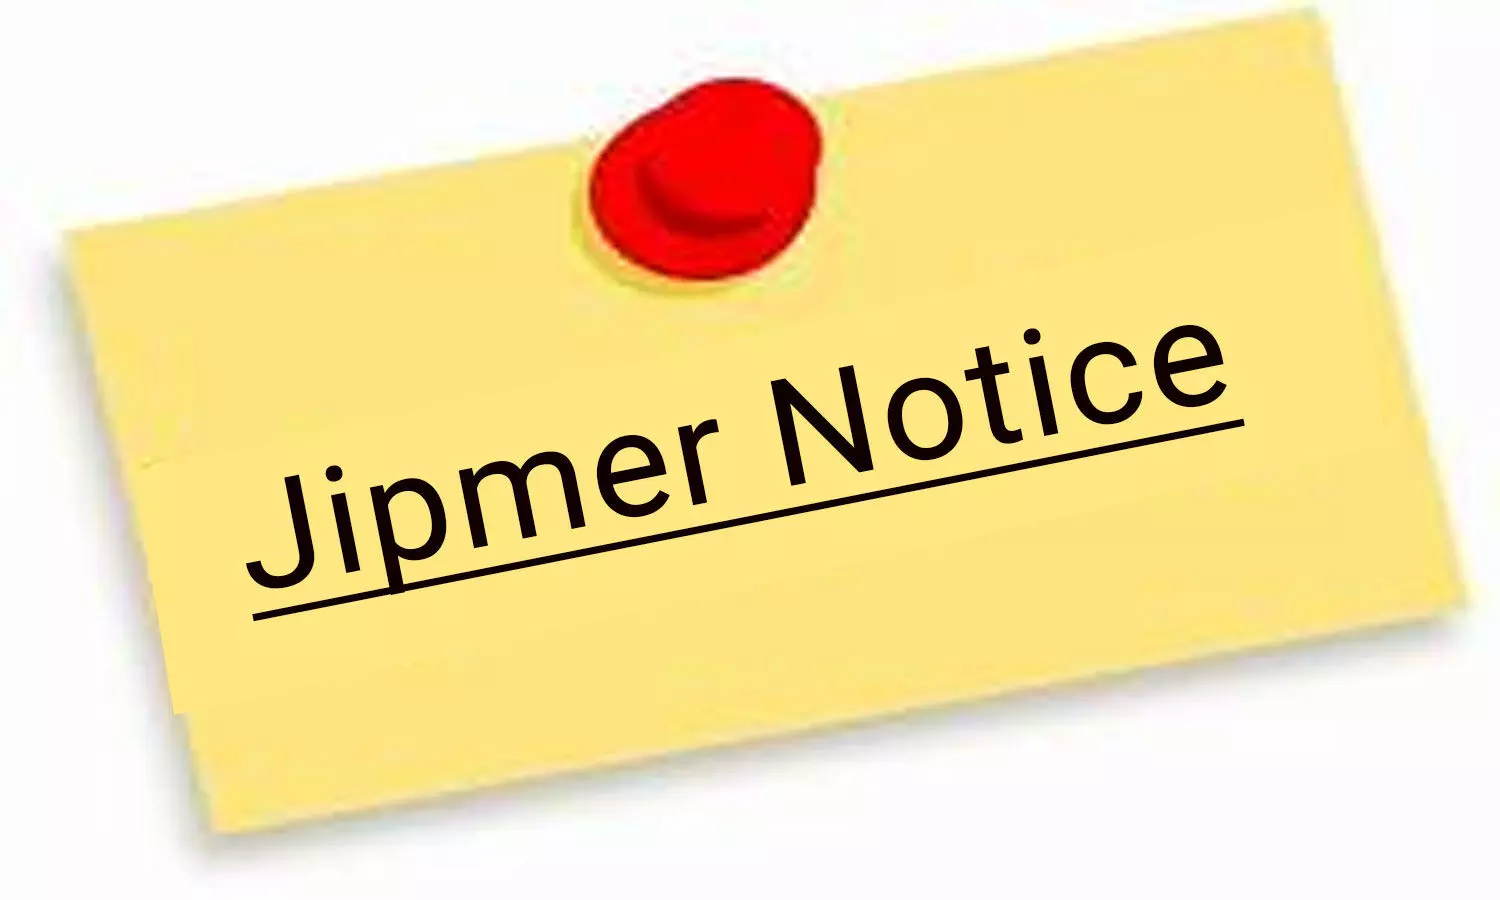 JIPMER Circular: MBBS students, Interns to update information in TCSion Portal